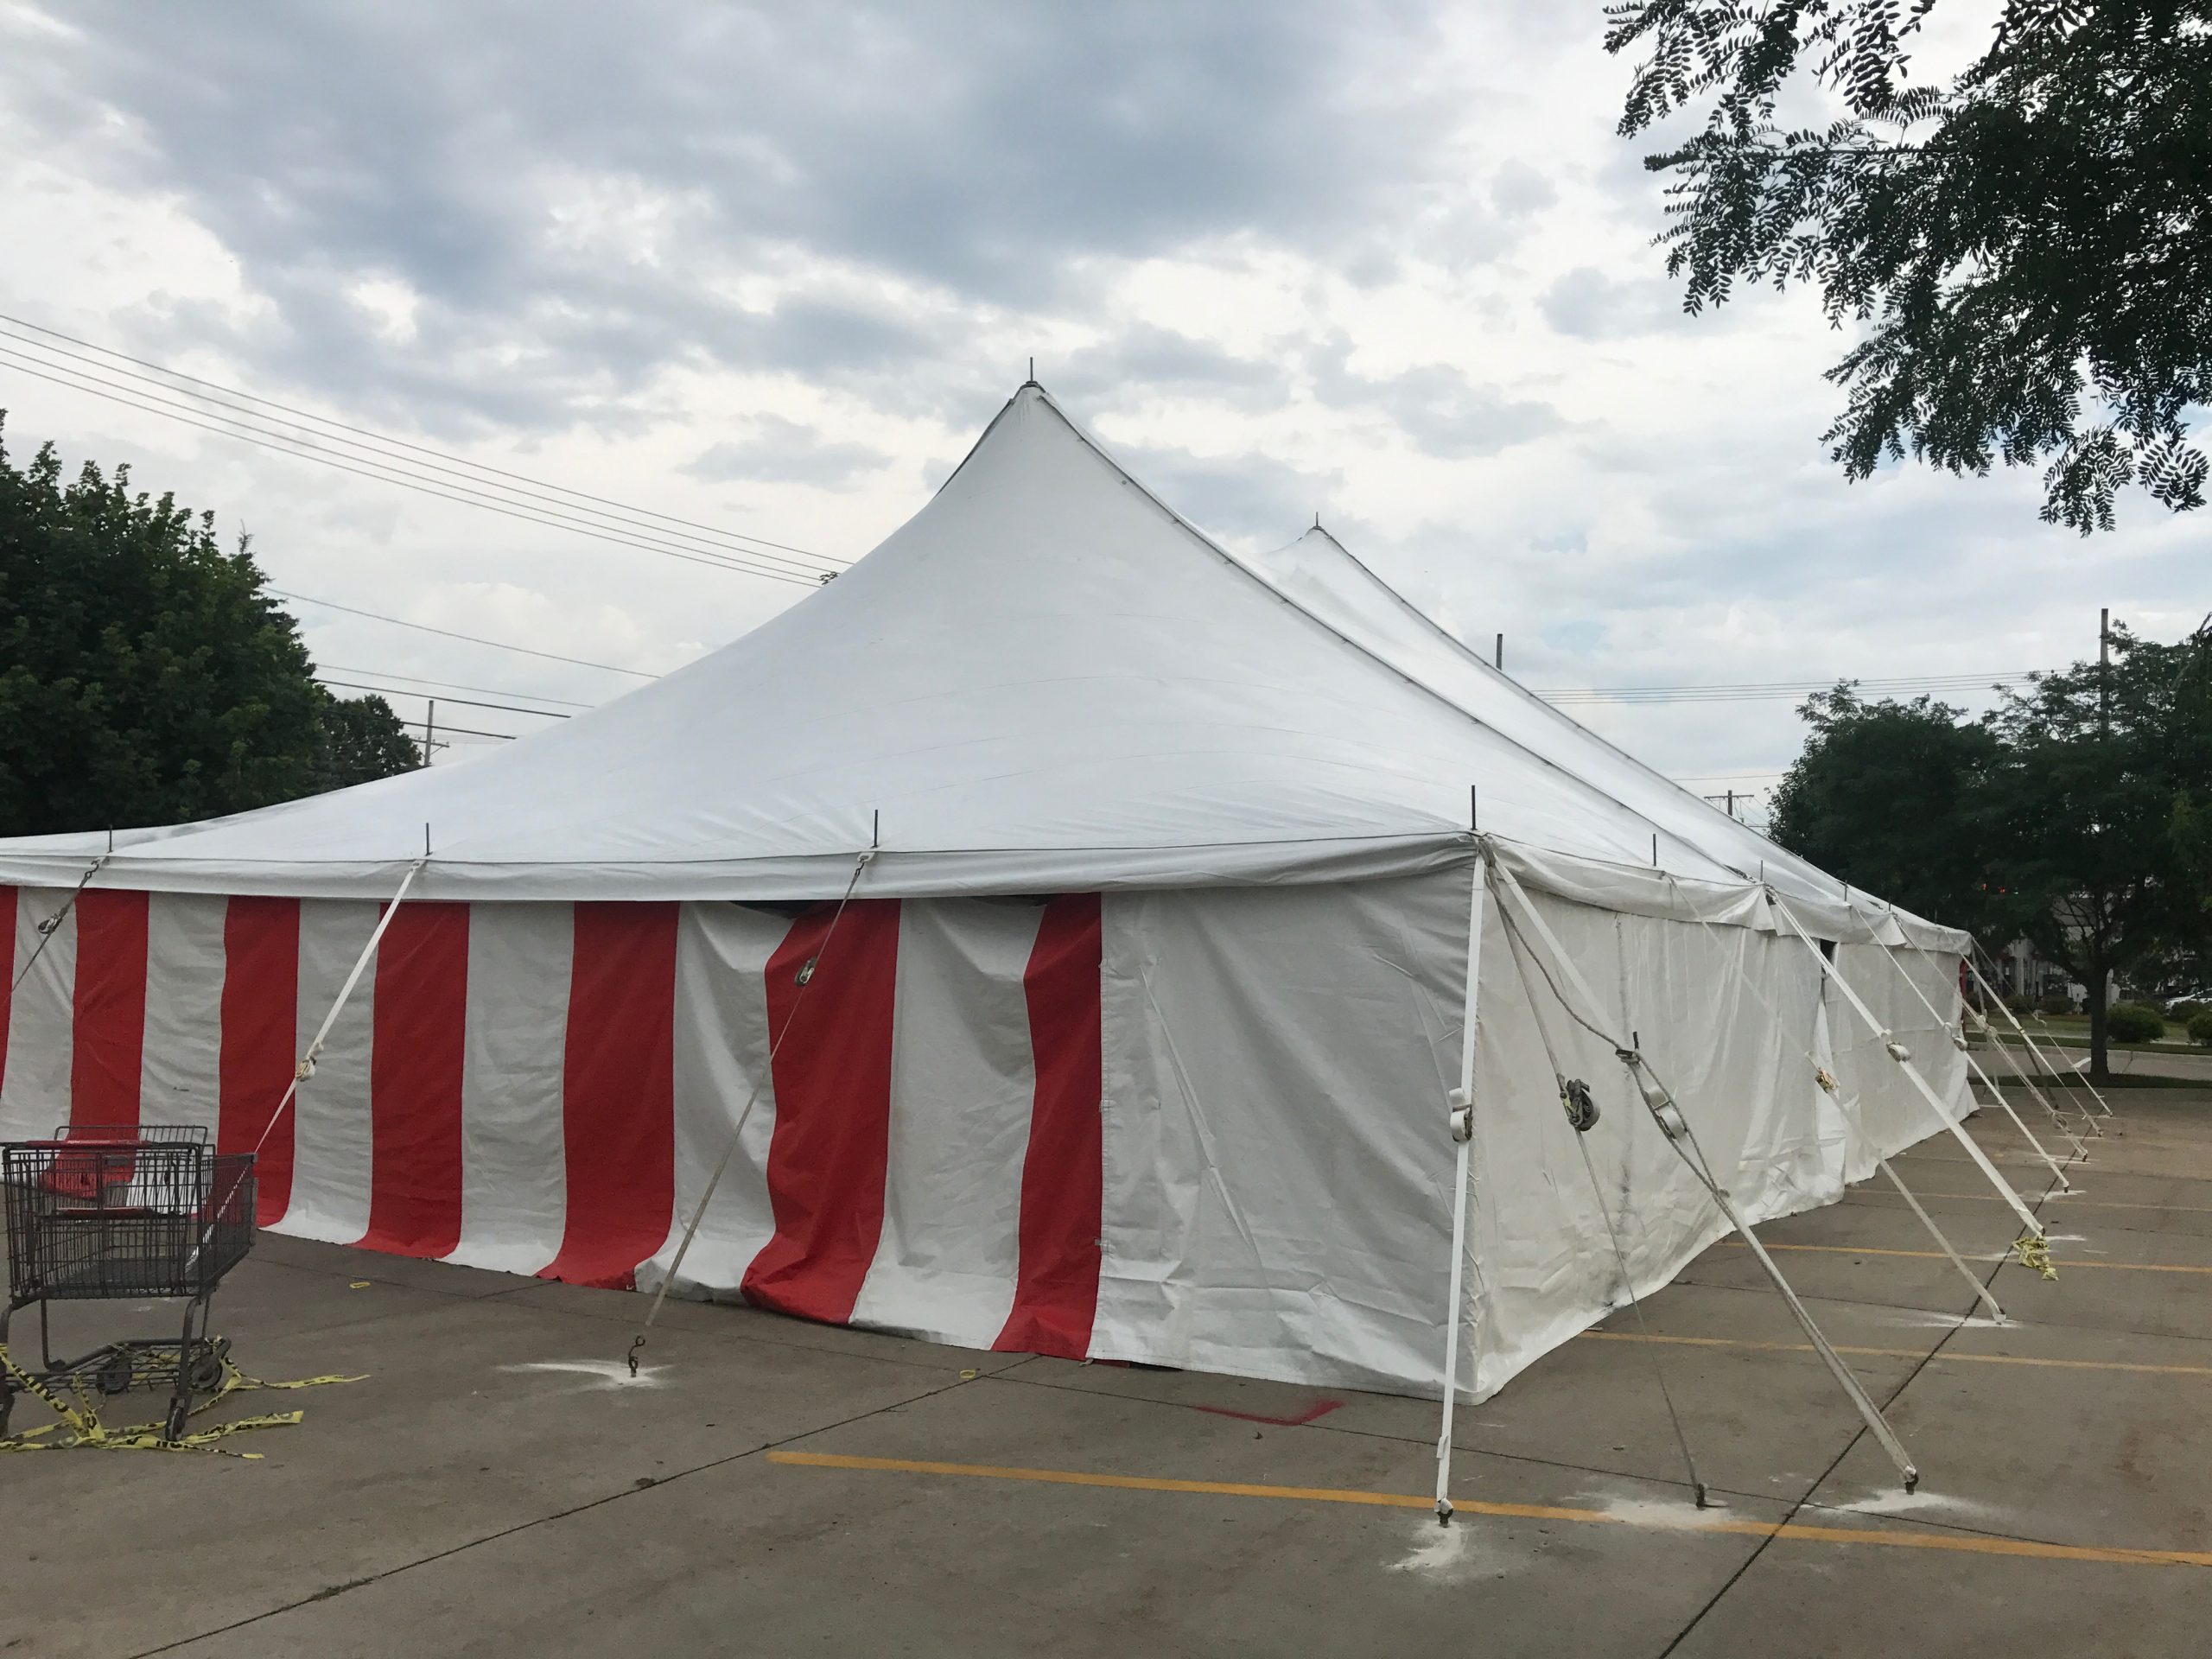 Outside of a 40' x 60' rope and pole tent with Red and White Sidewall used for Fireworks tent at Hy-Vee in Cedar Rapids, Iowa